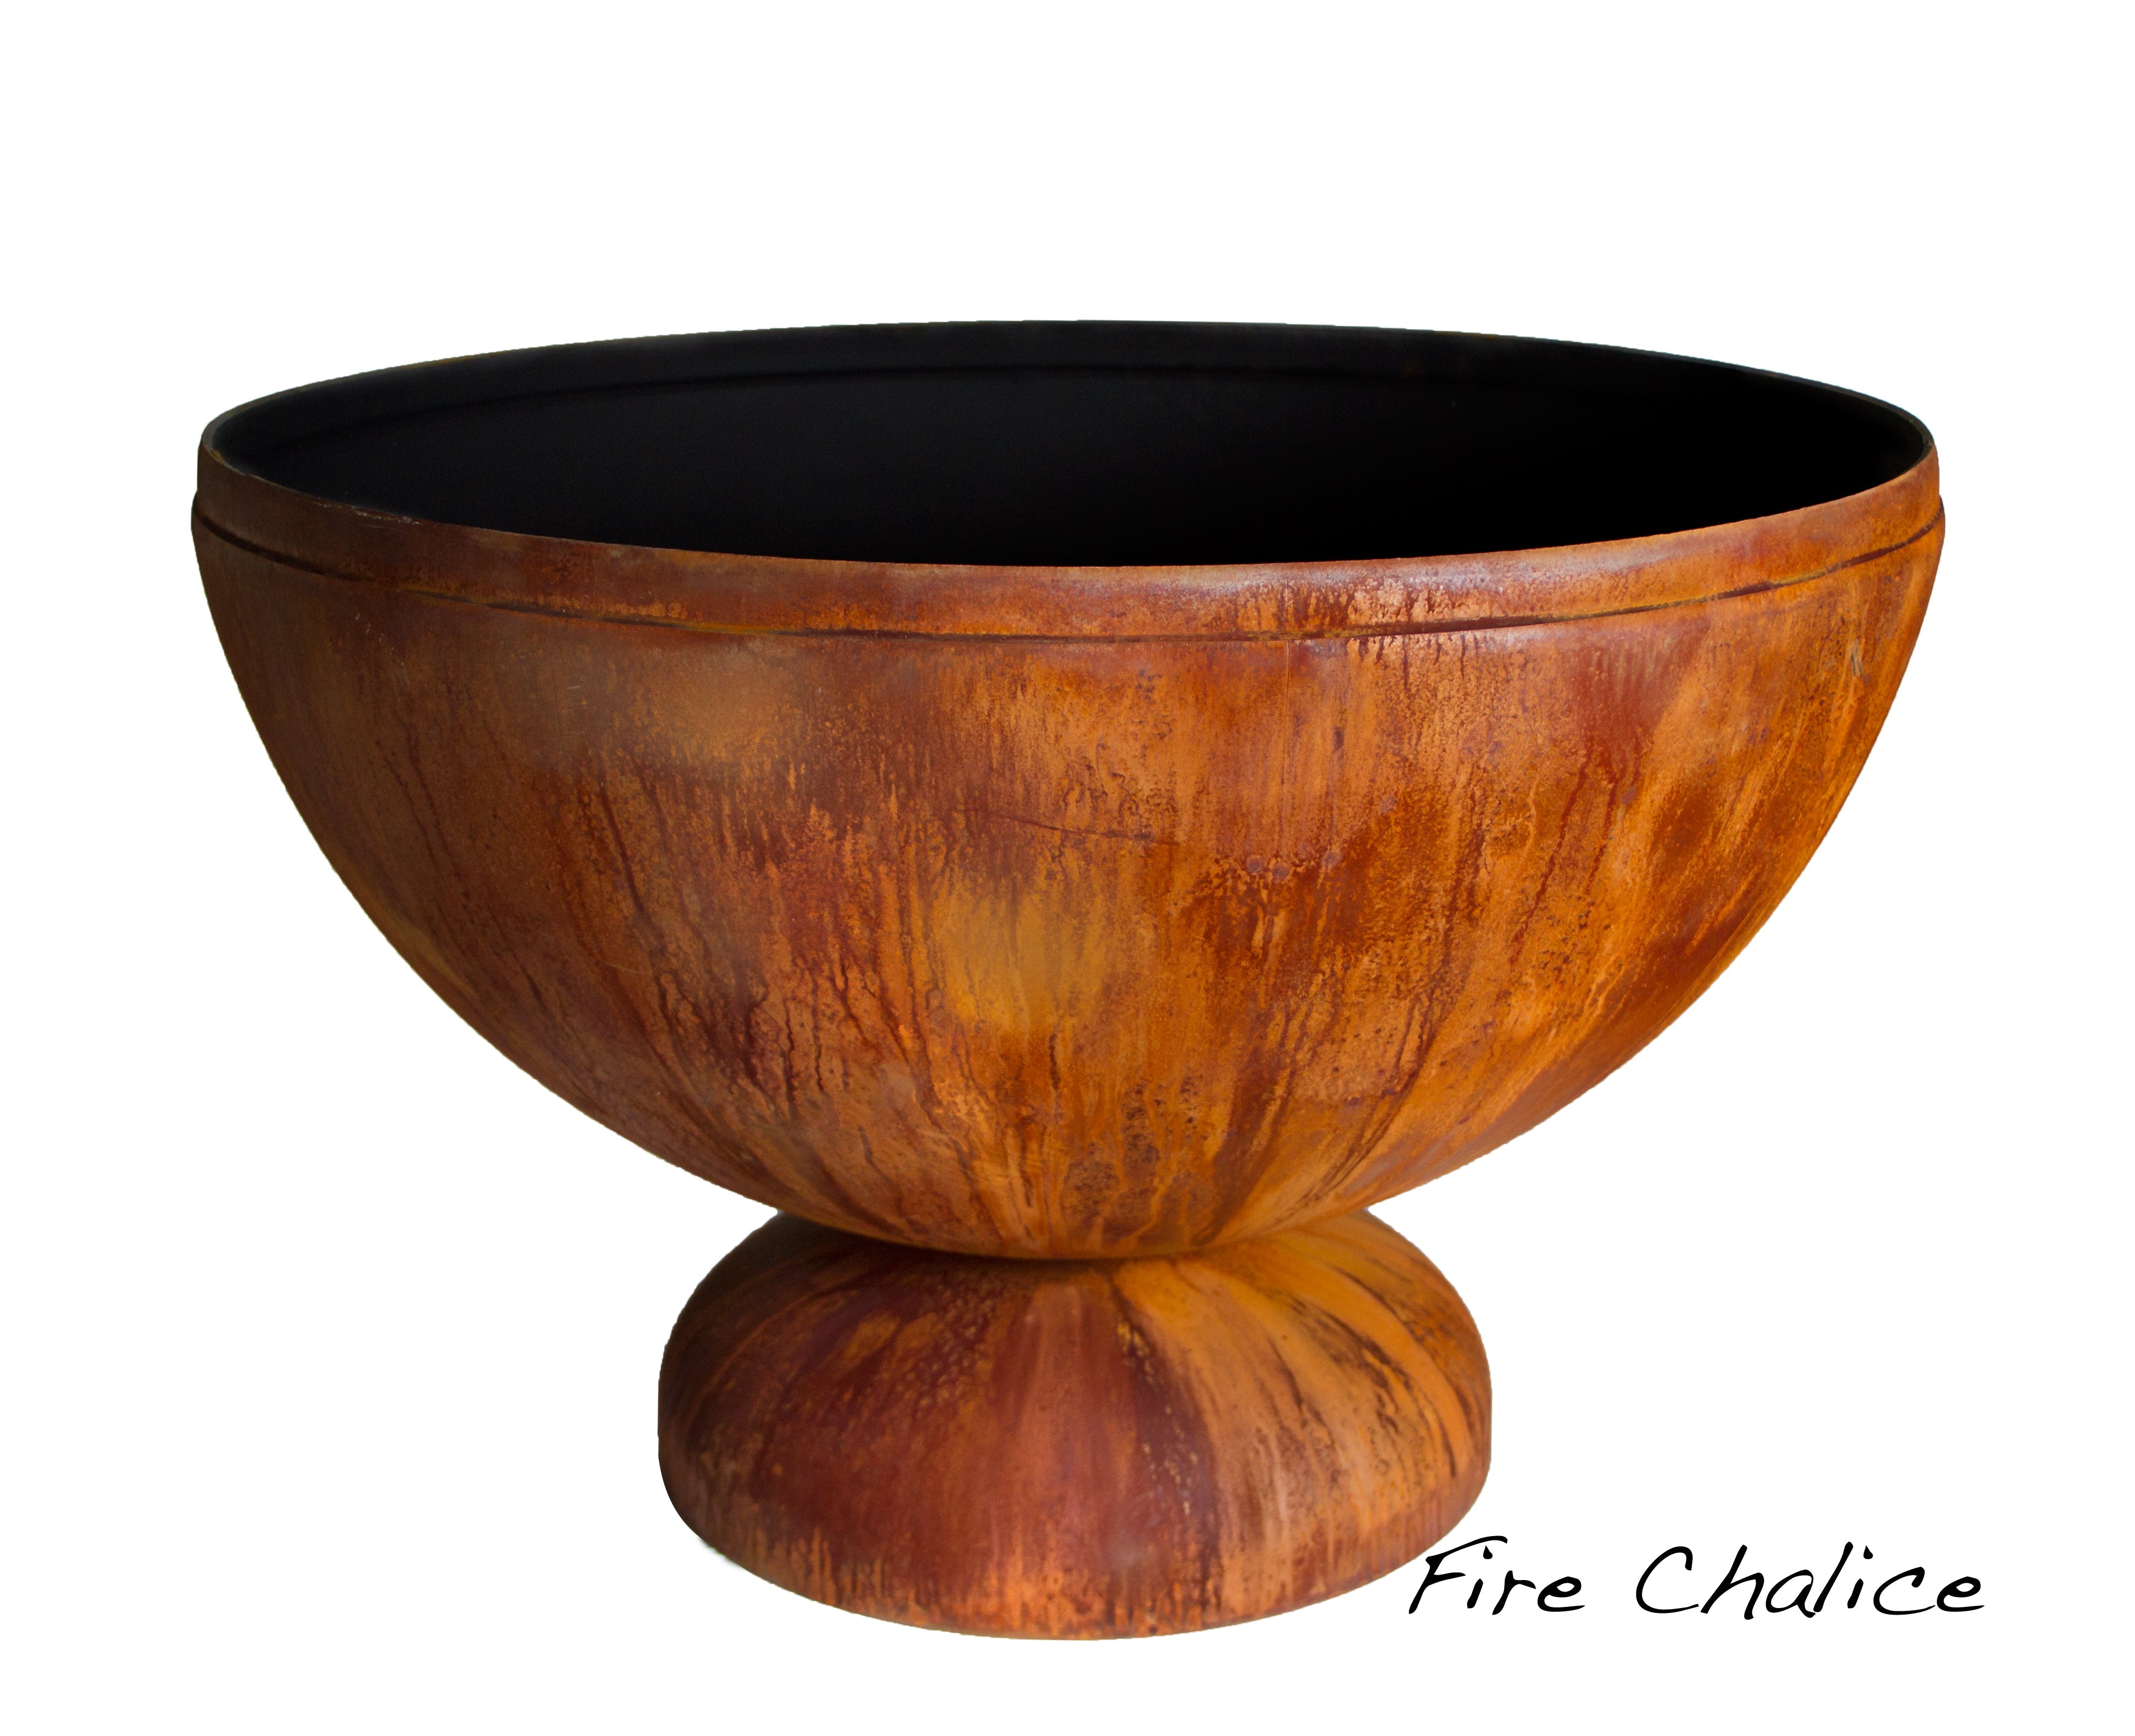 Ohio Flame Fire Chalice Artisan Fire Bowl- Size 47"